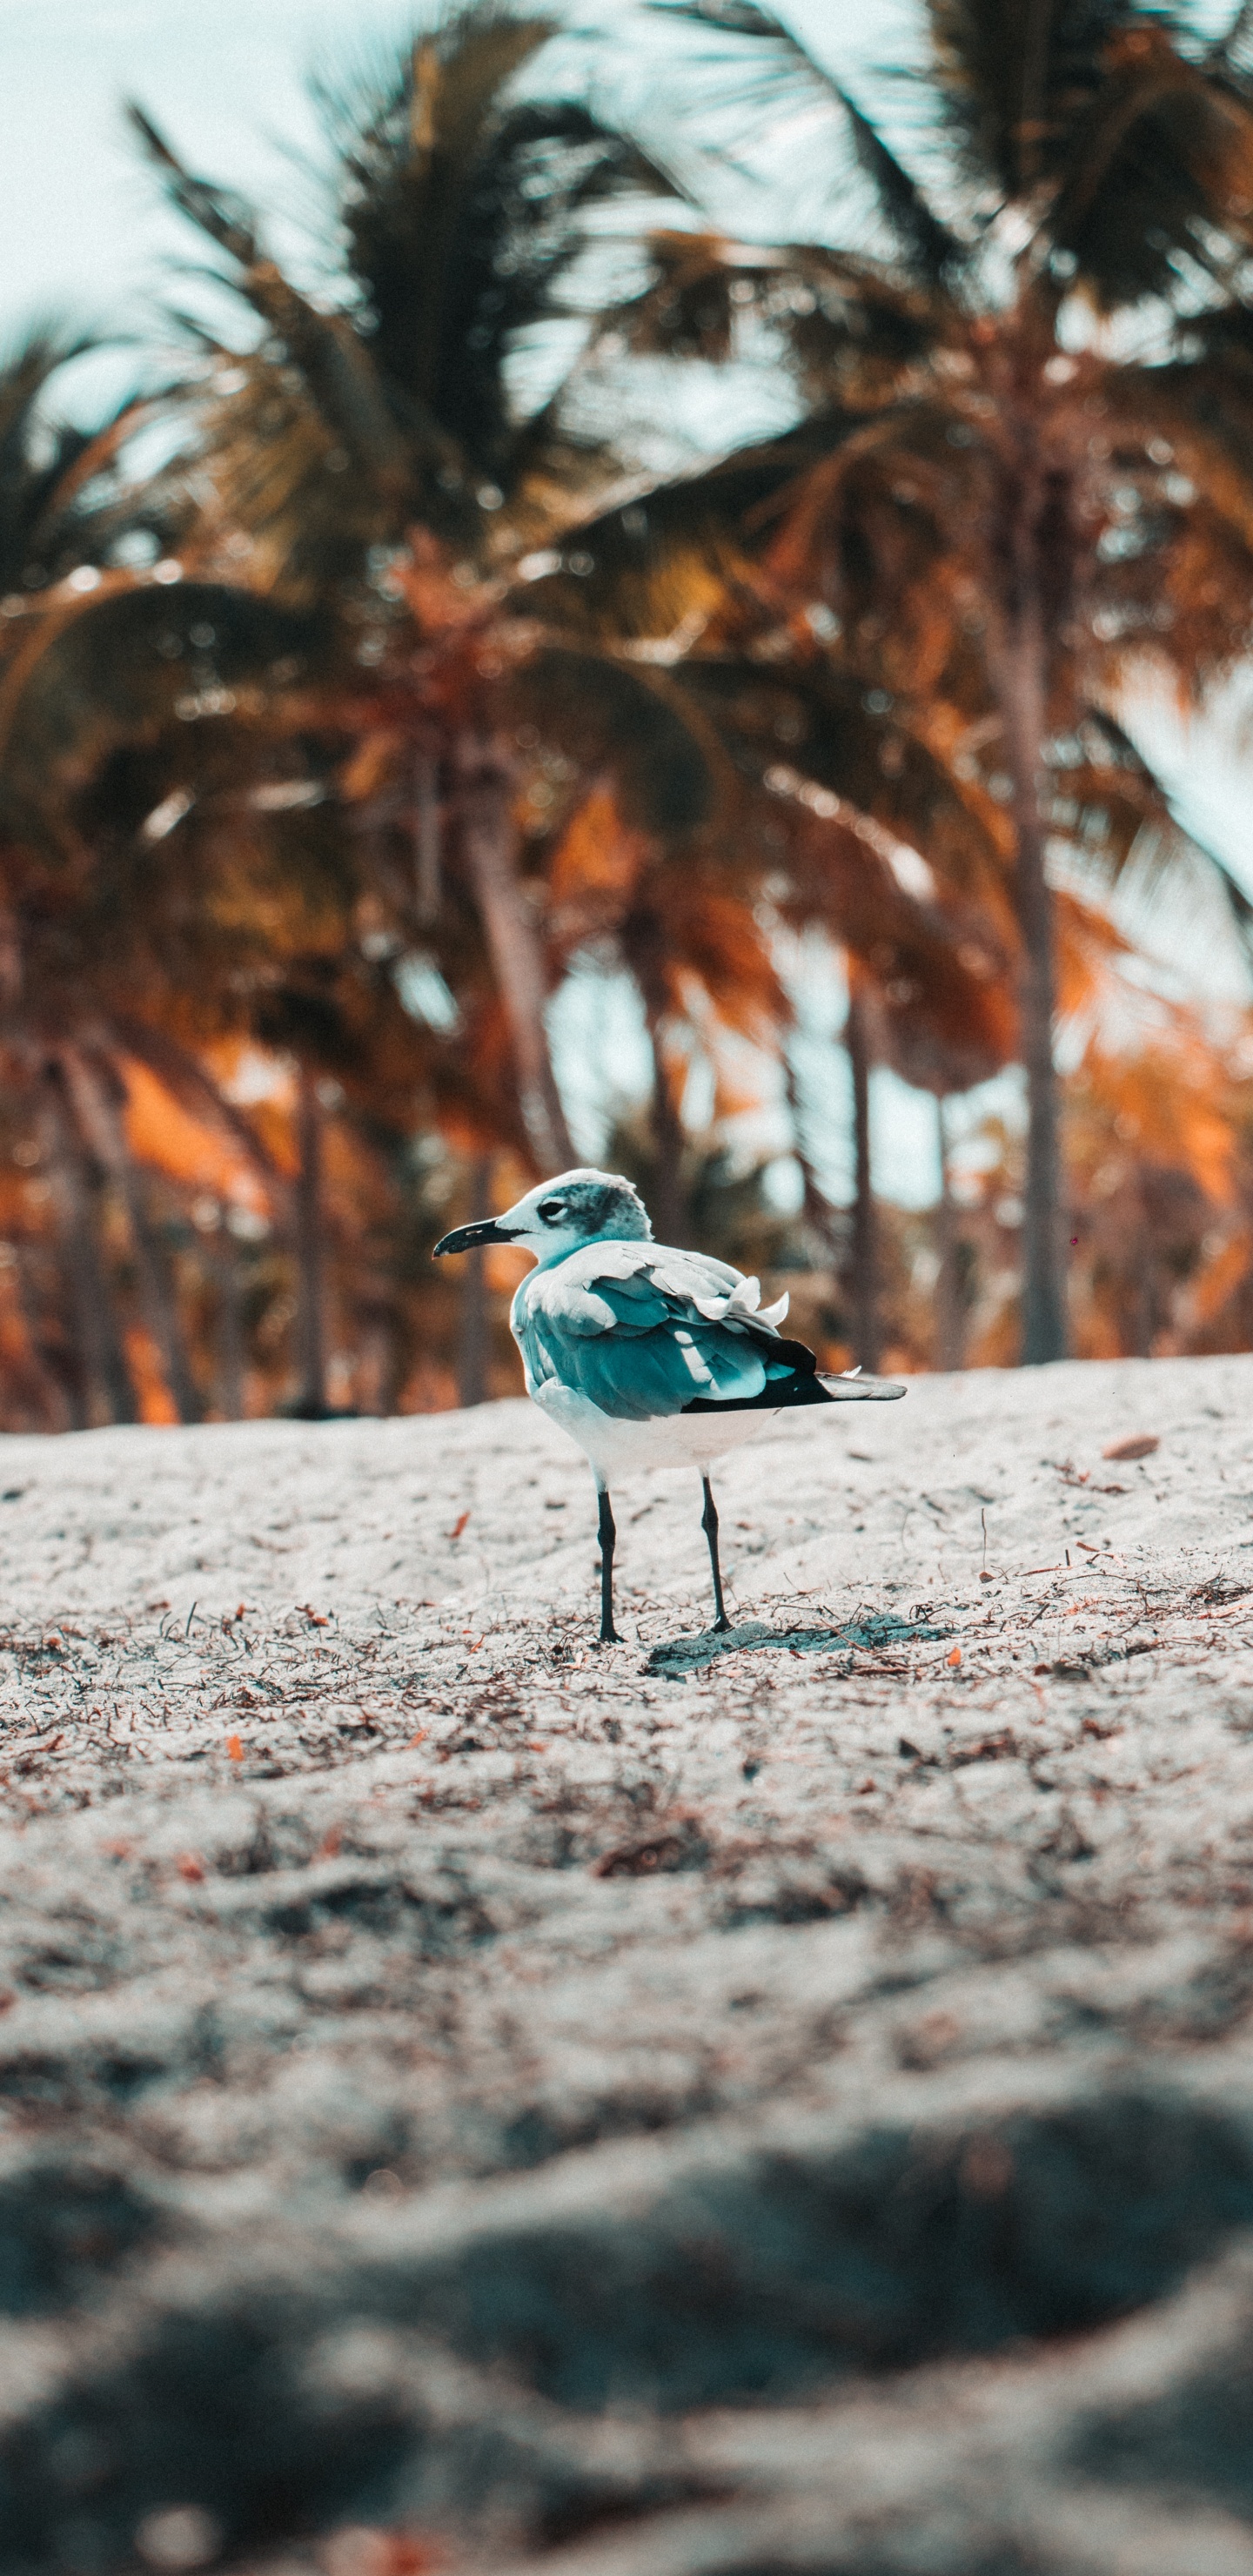 Blue and White Bird on Gray Sand During Daytime. Wallpaper in 1440x2960 Resolution